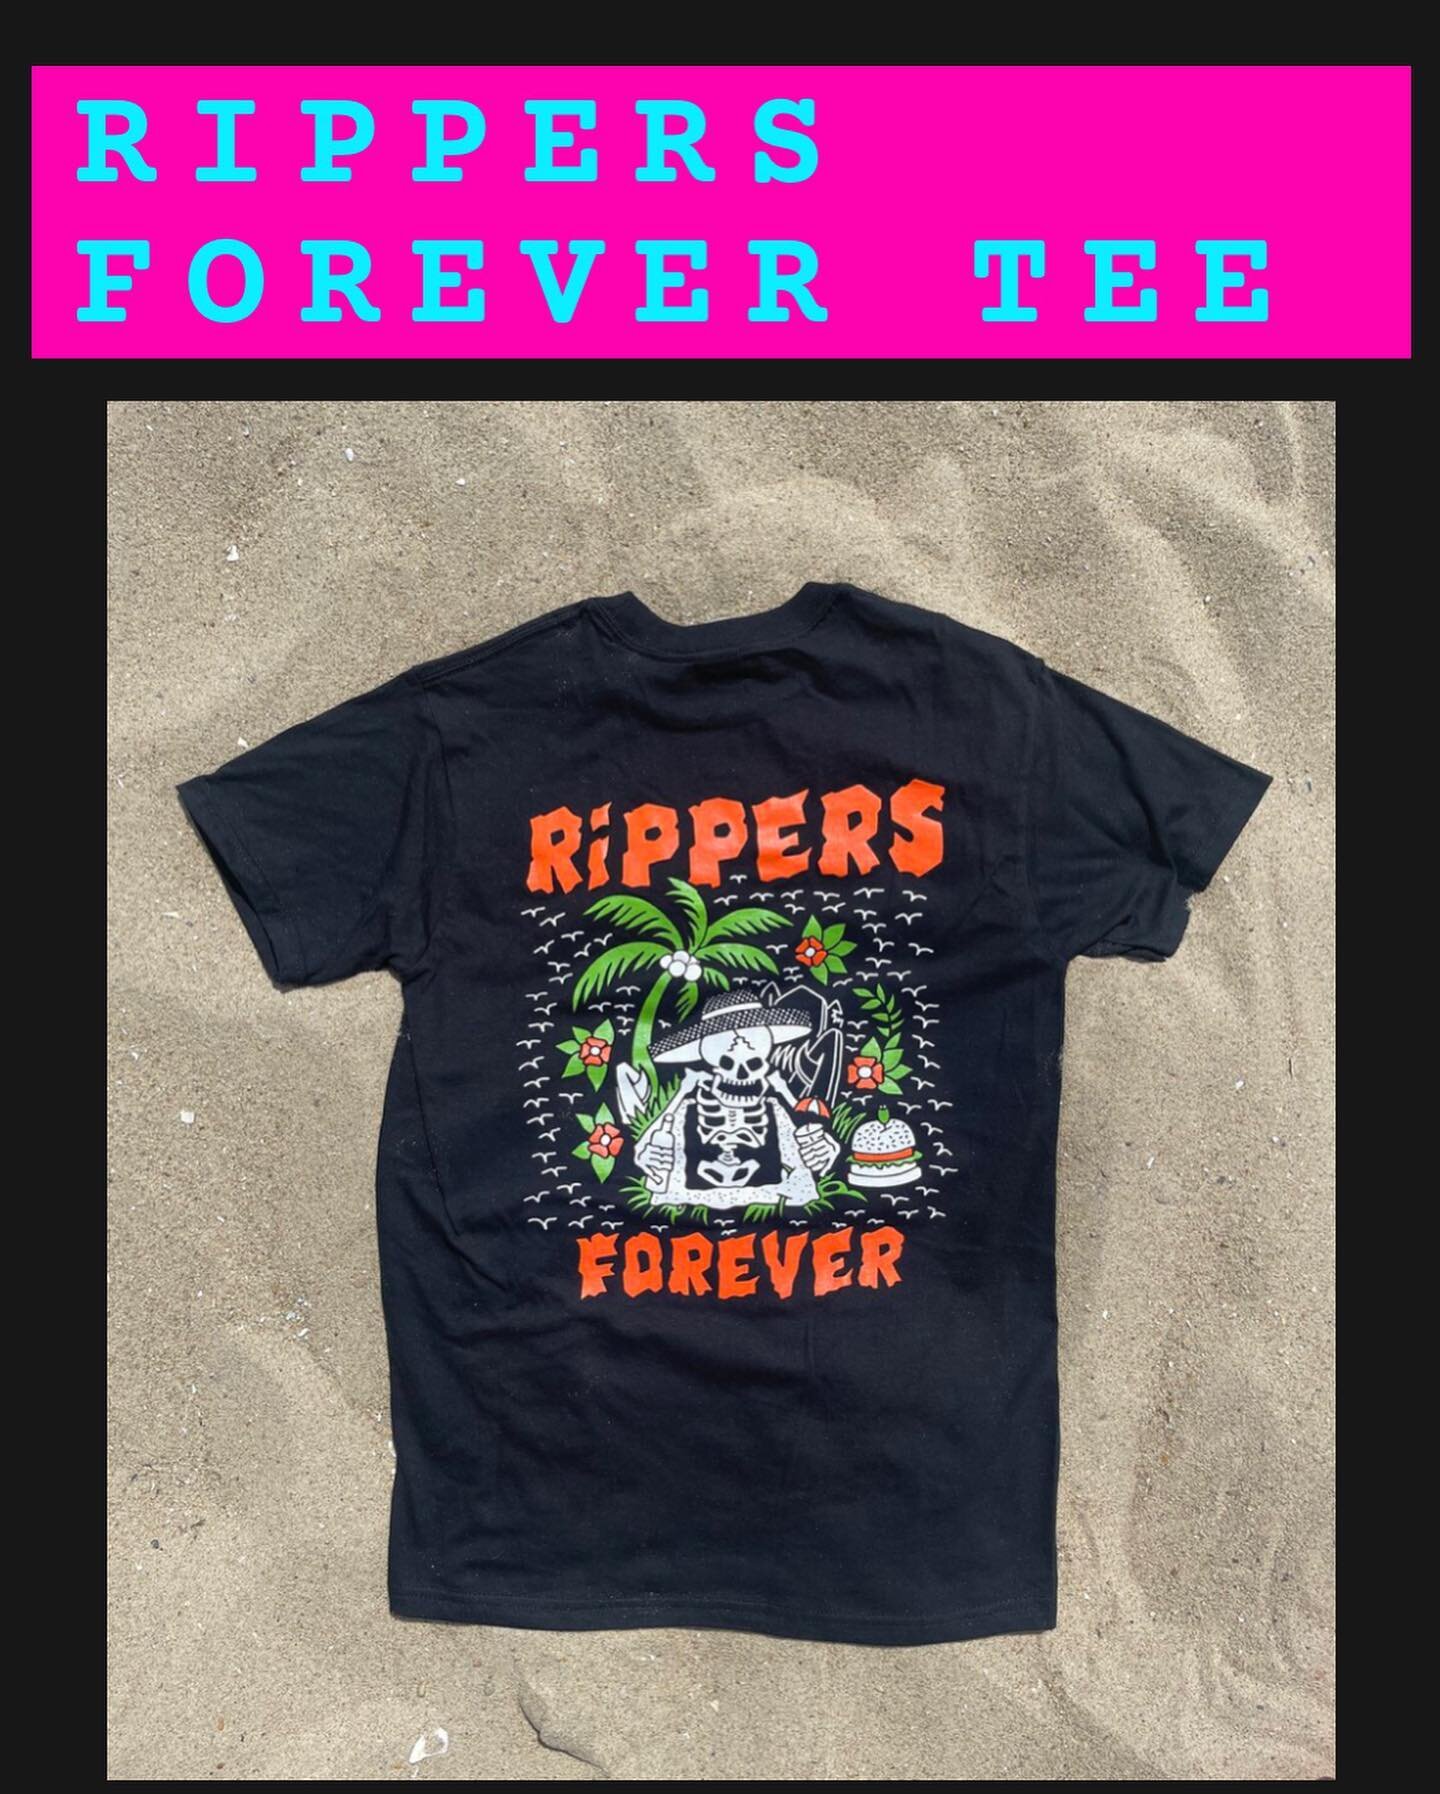 NEW MERCH UP ON THE WEB! Rippers Summer &lsquo;21 Collection is now available on www.eatrippers.com or hit the link in our bio.